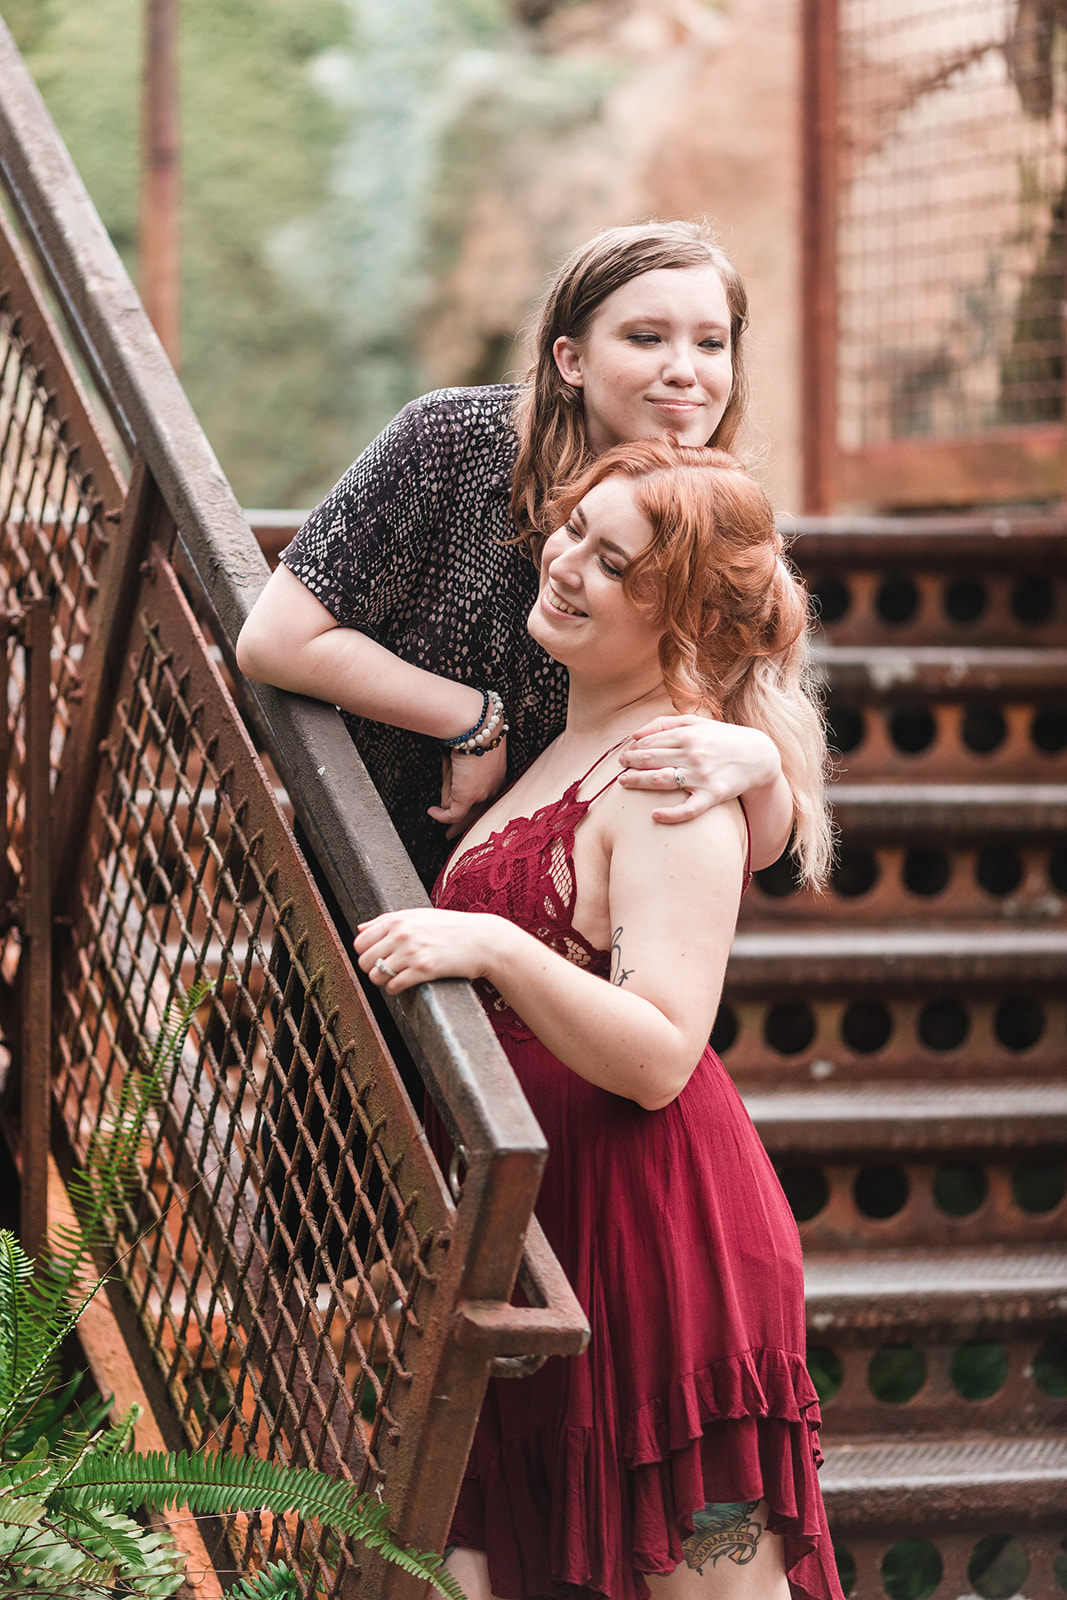 Two brides embrace on a stairwell, one resting her head on top of the other's head, capturing a moment of love and affection in this unique photo opportunity.